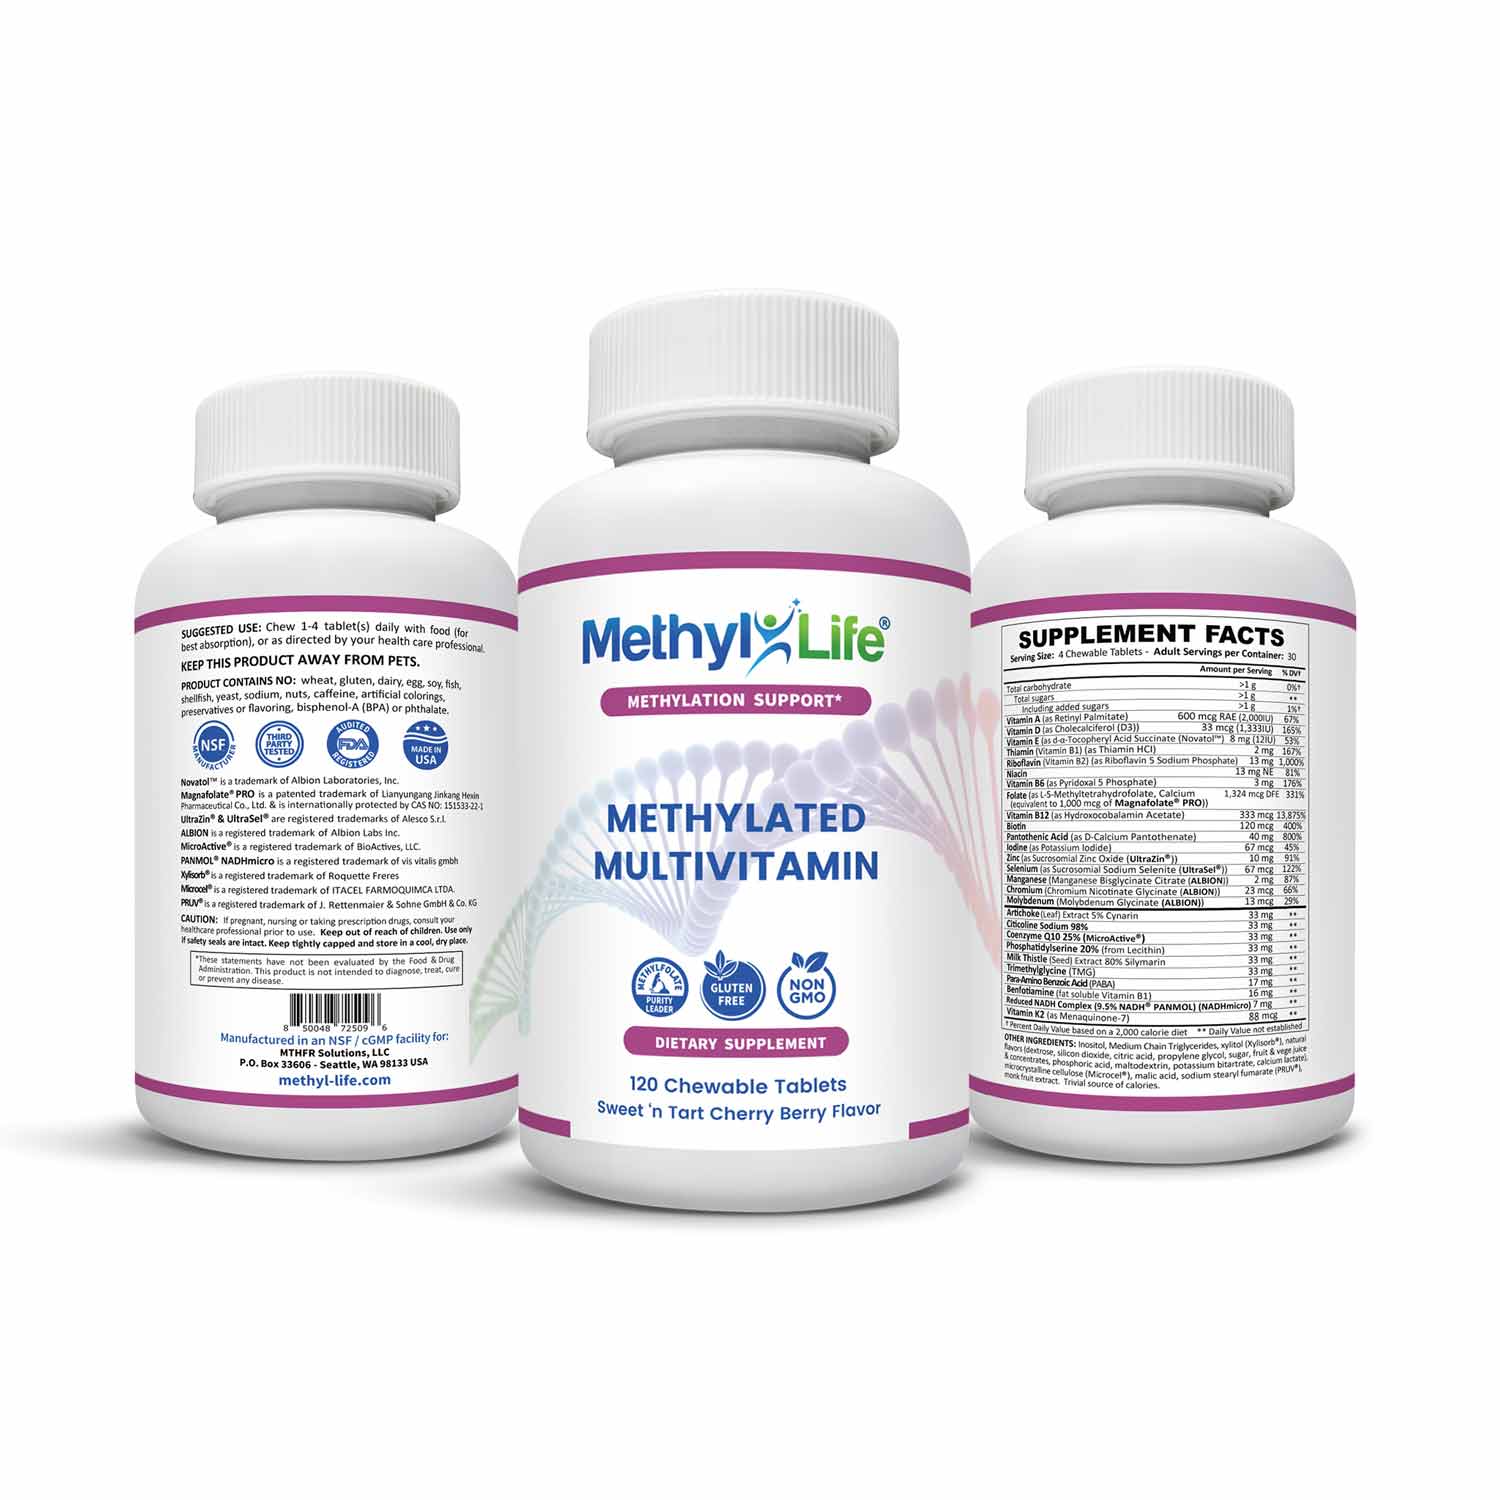 Chewable Methylated Multivitamin - L-methylfolate + Active B12 - bottle all 3 sides - 30 Adult Servings - Methyl-Life